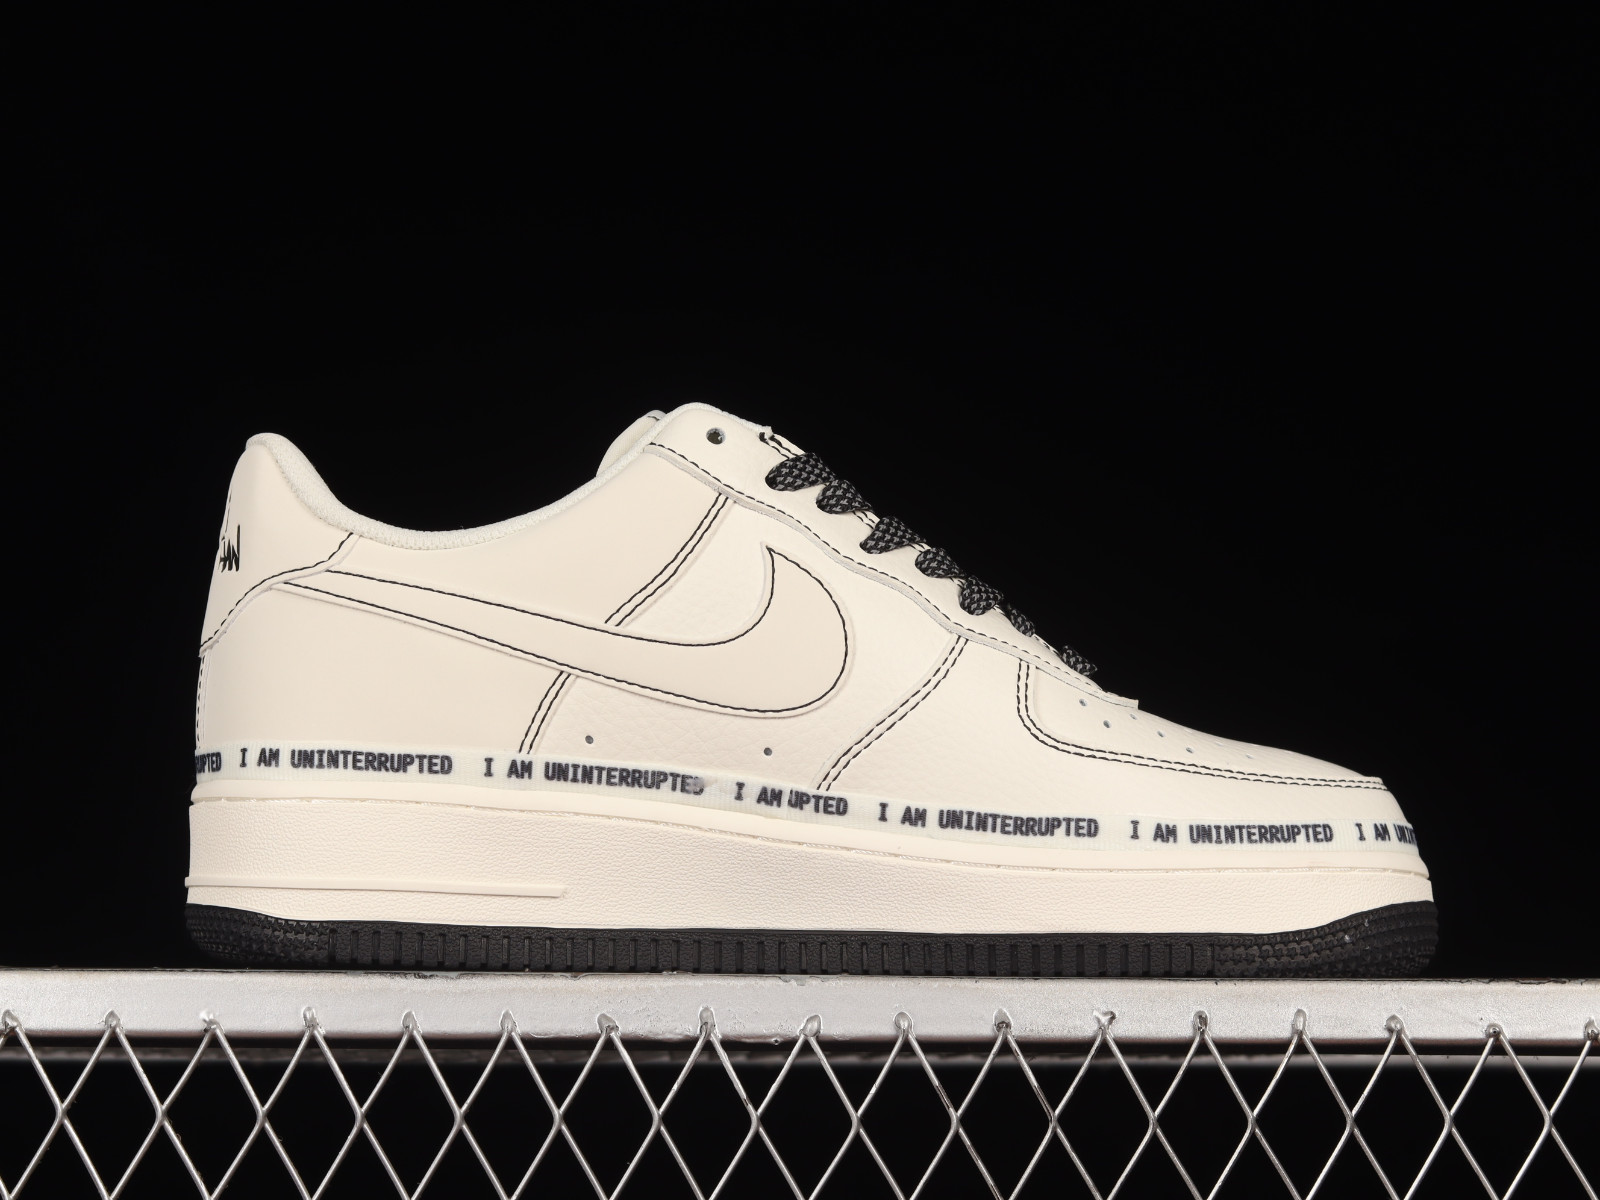 MultiscaleconsultingShops - Uninterrupted x Nike Air Force 1 07